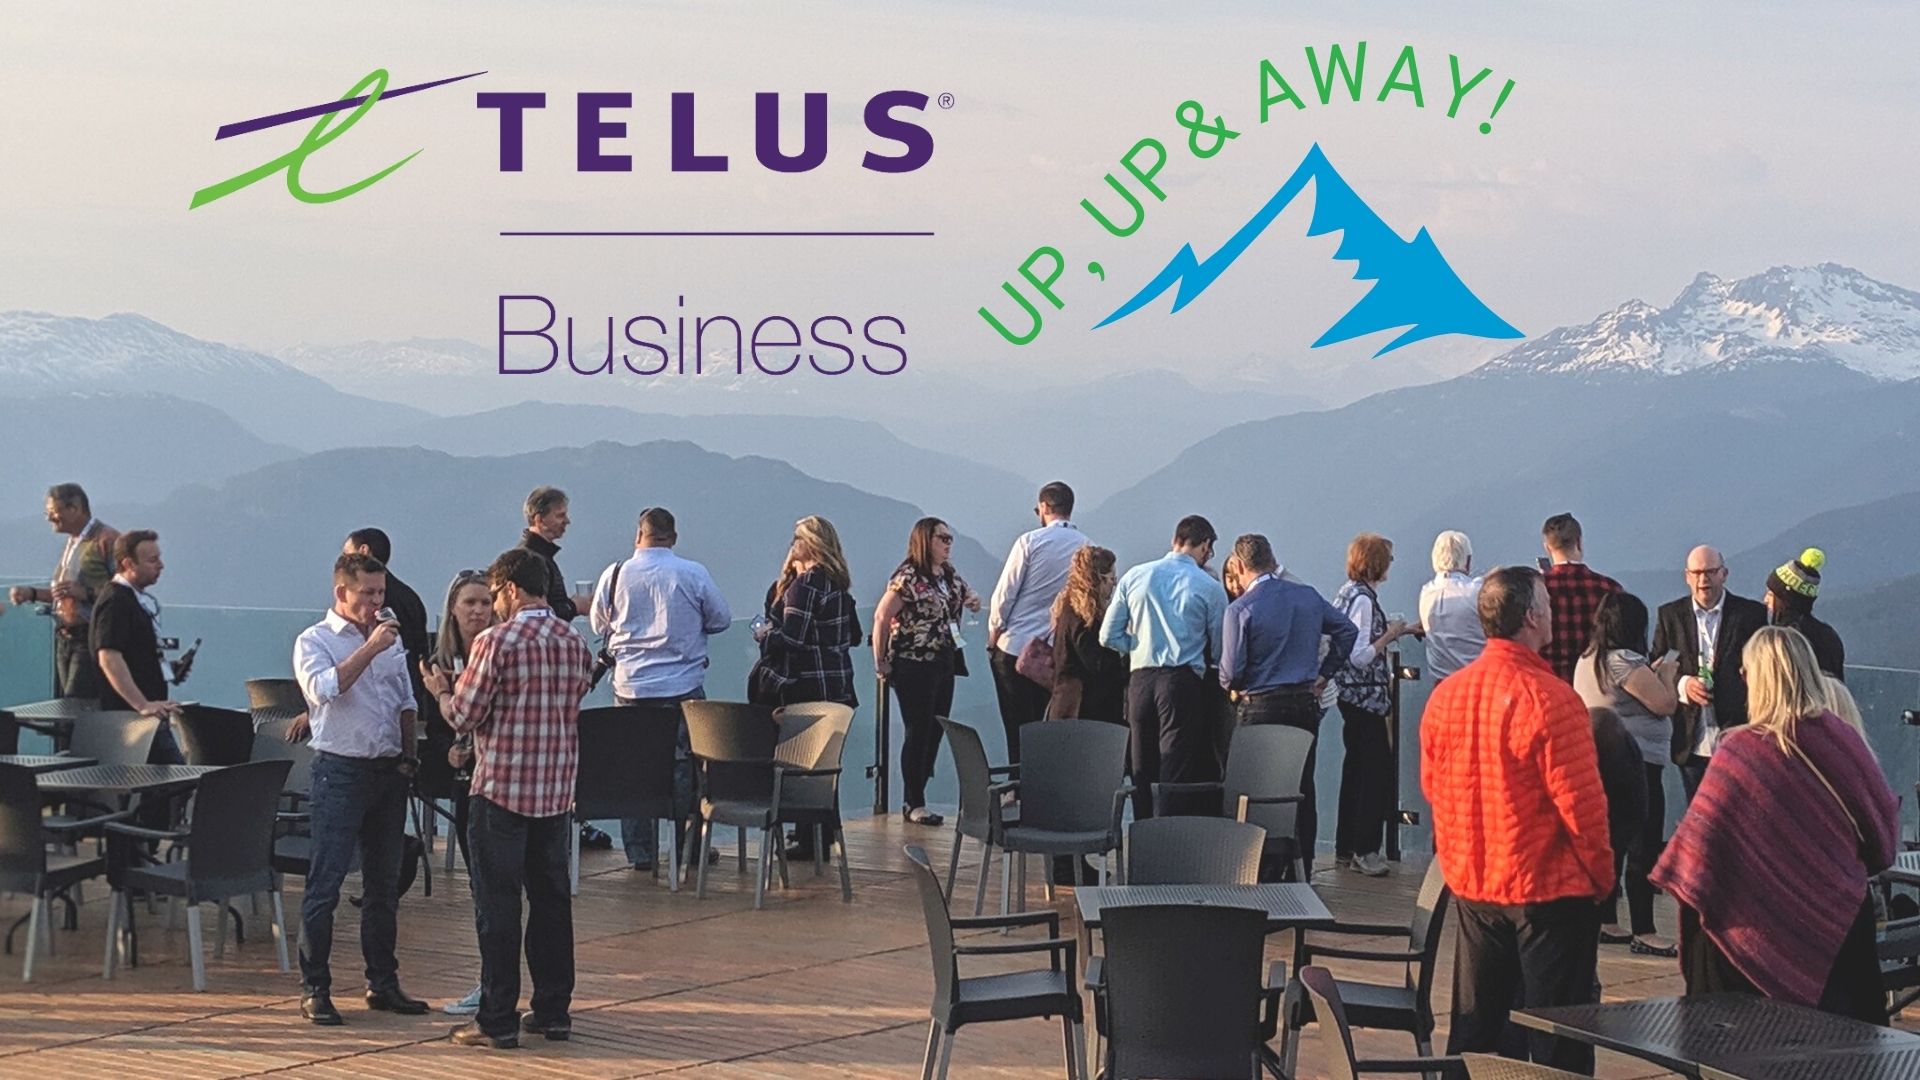 Go Up, Up, and Away with TELUS Business